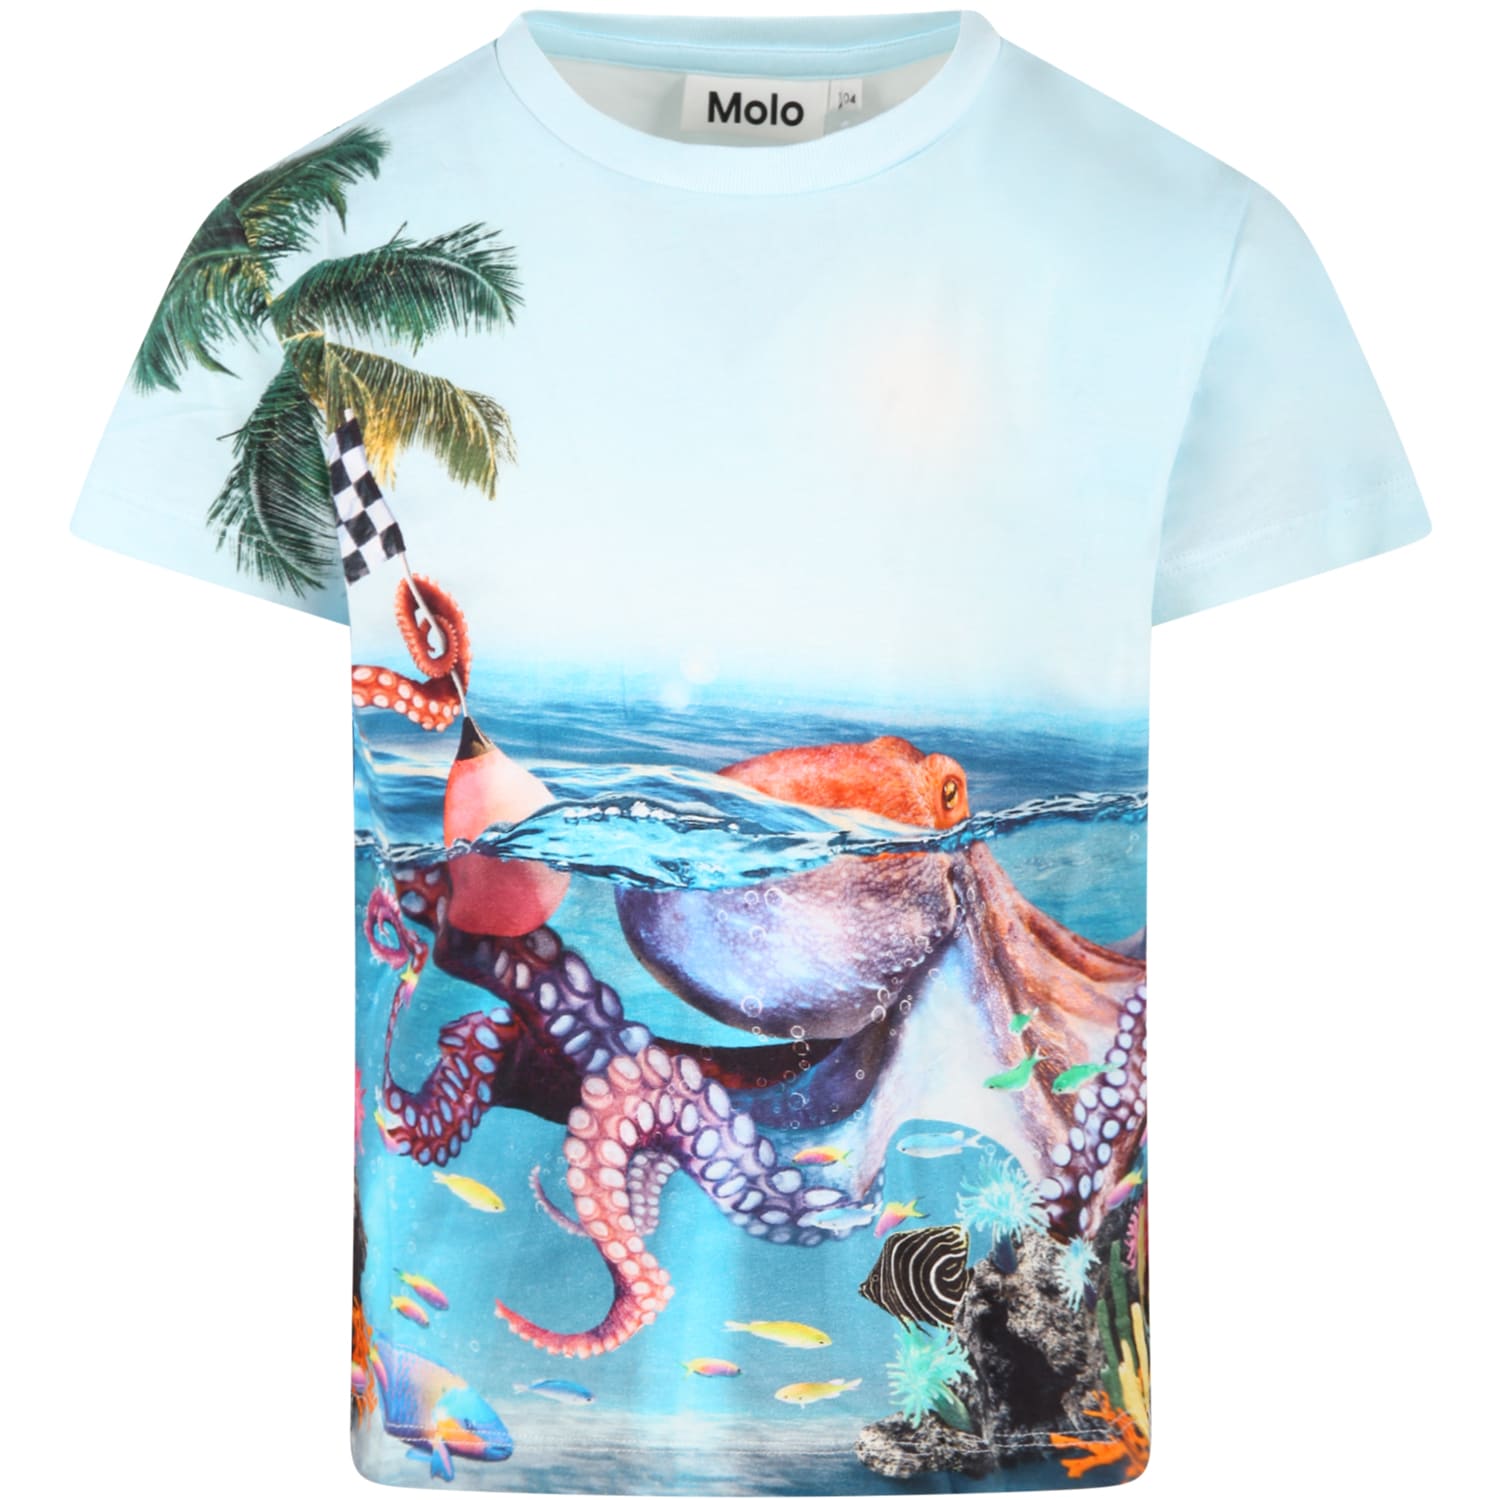 Molo Light Blue T-shirt For Boy With Marine Animals